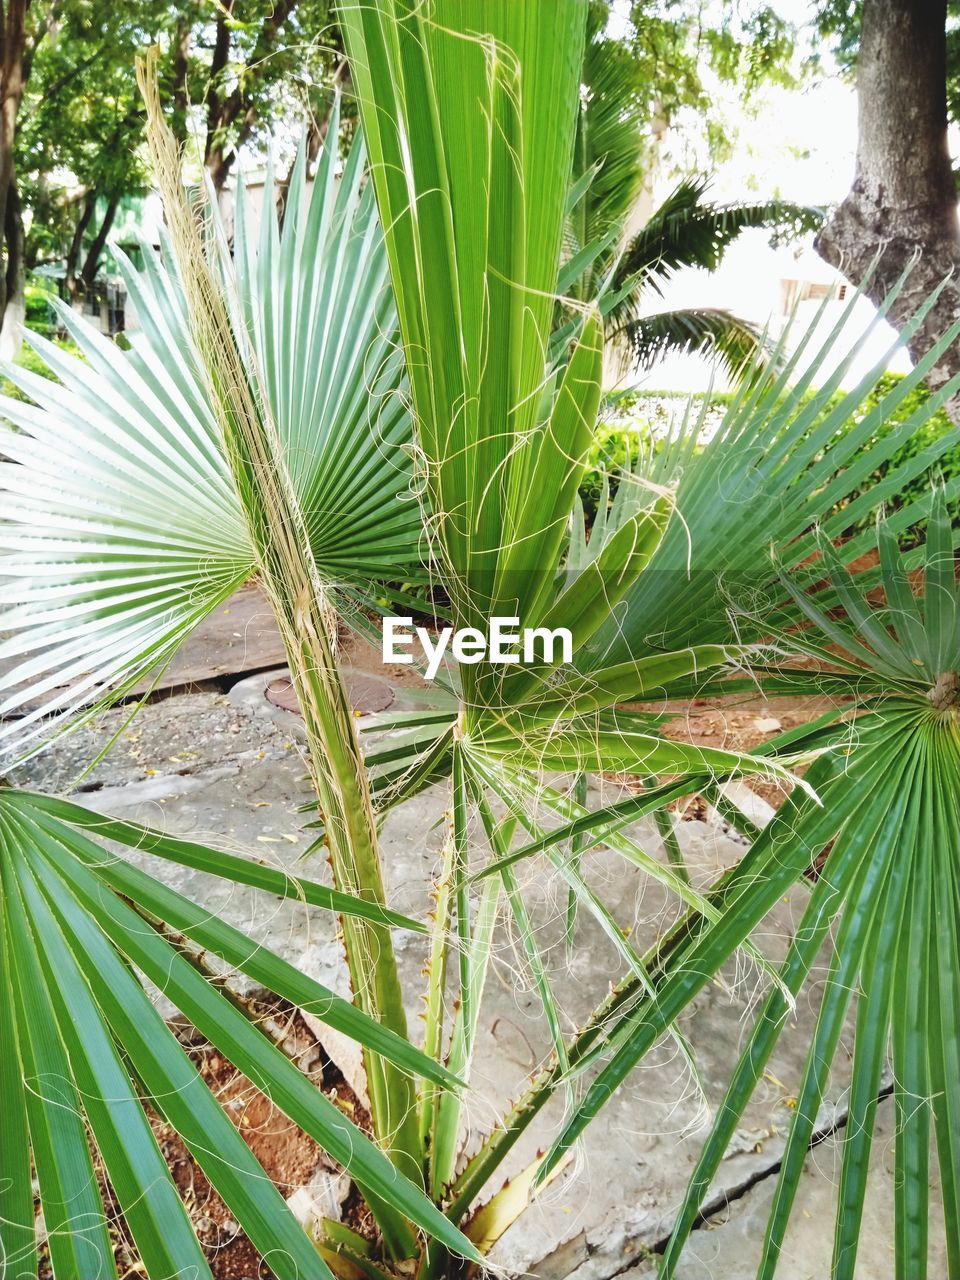 CLOSE-UP OF PALM TREES GROWING ON FIELD